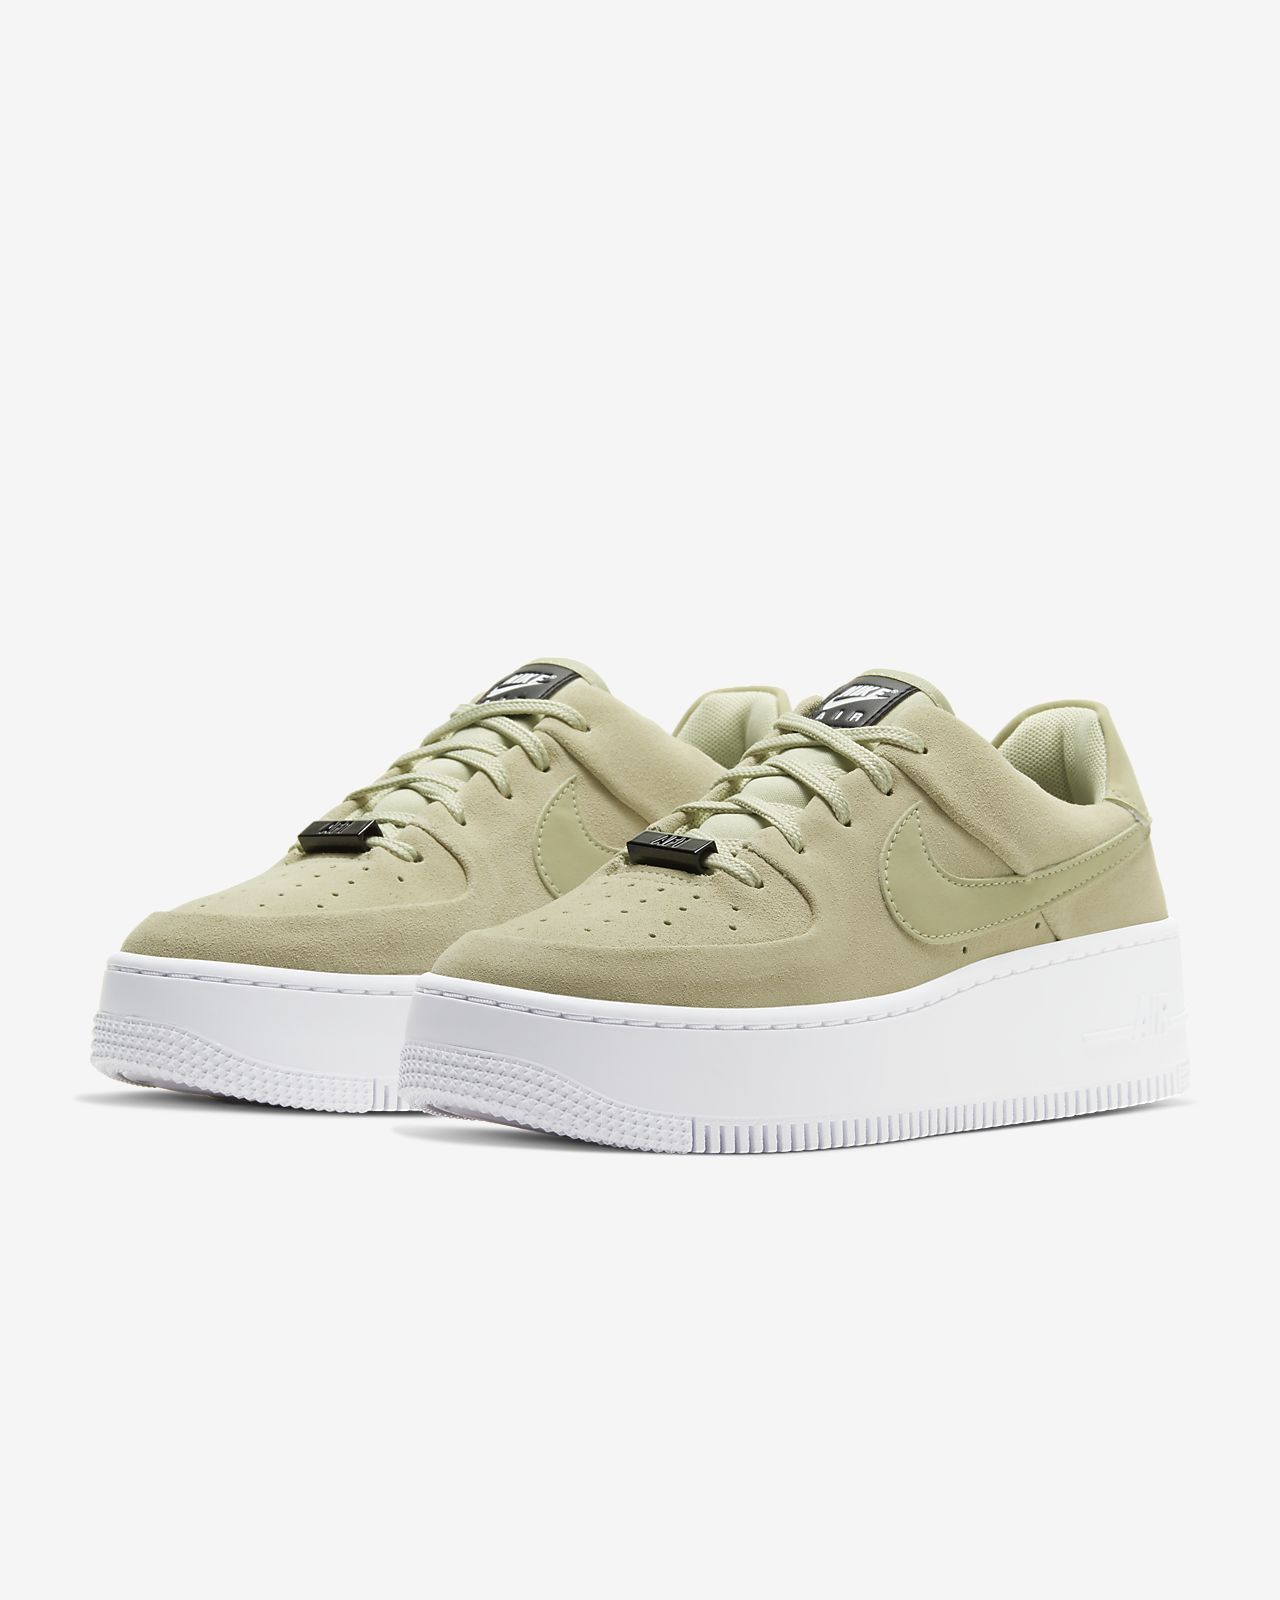 air force 1 donna sage low